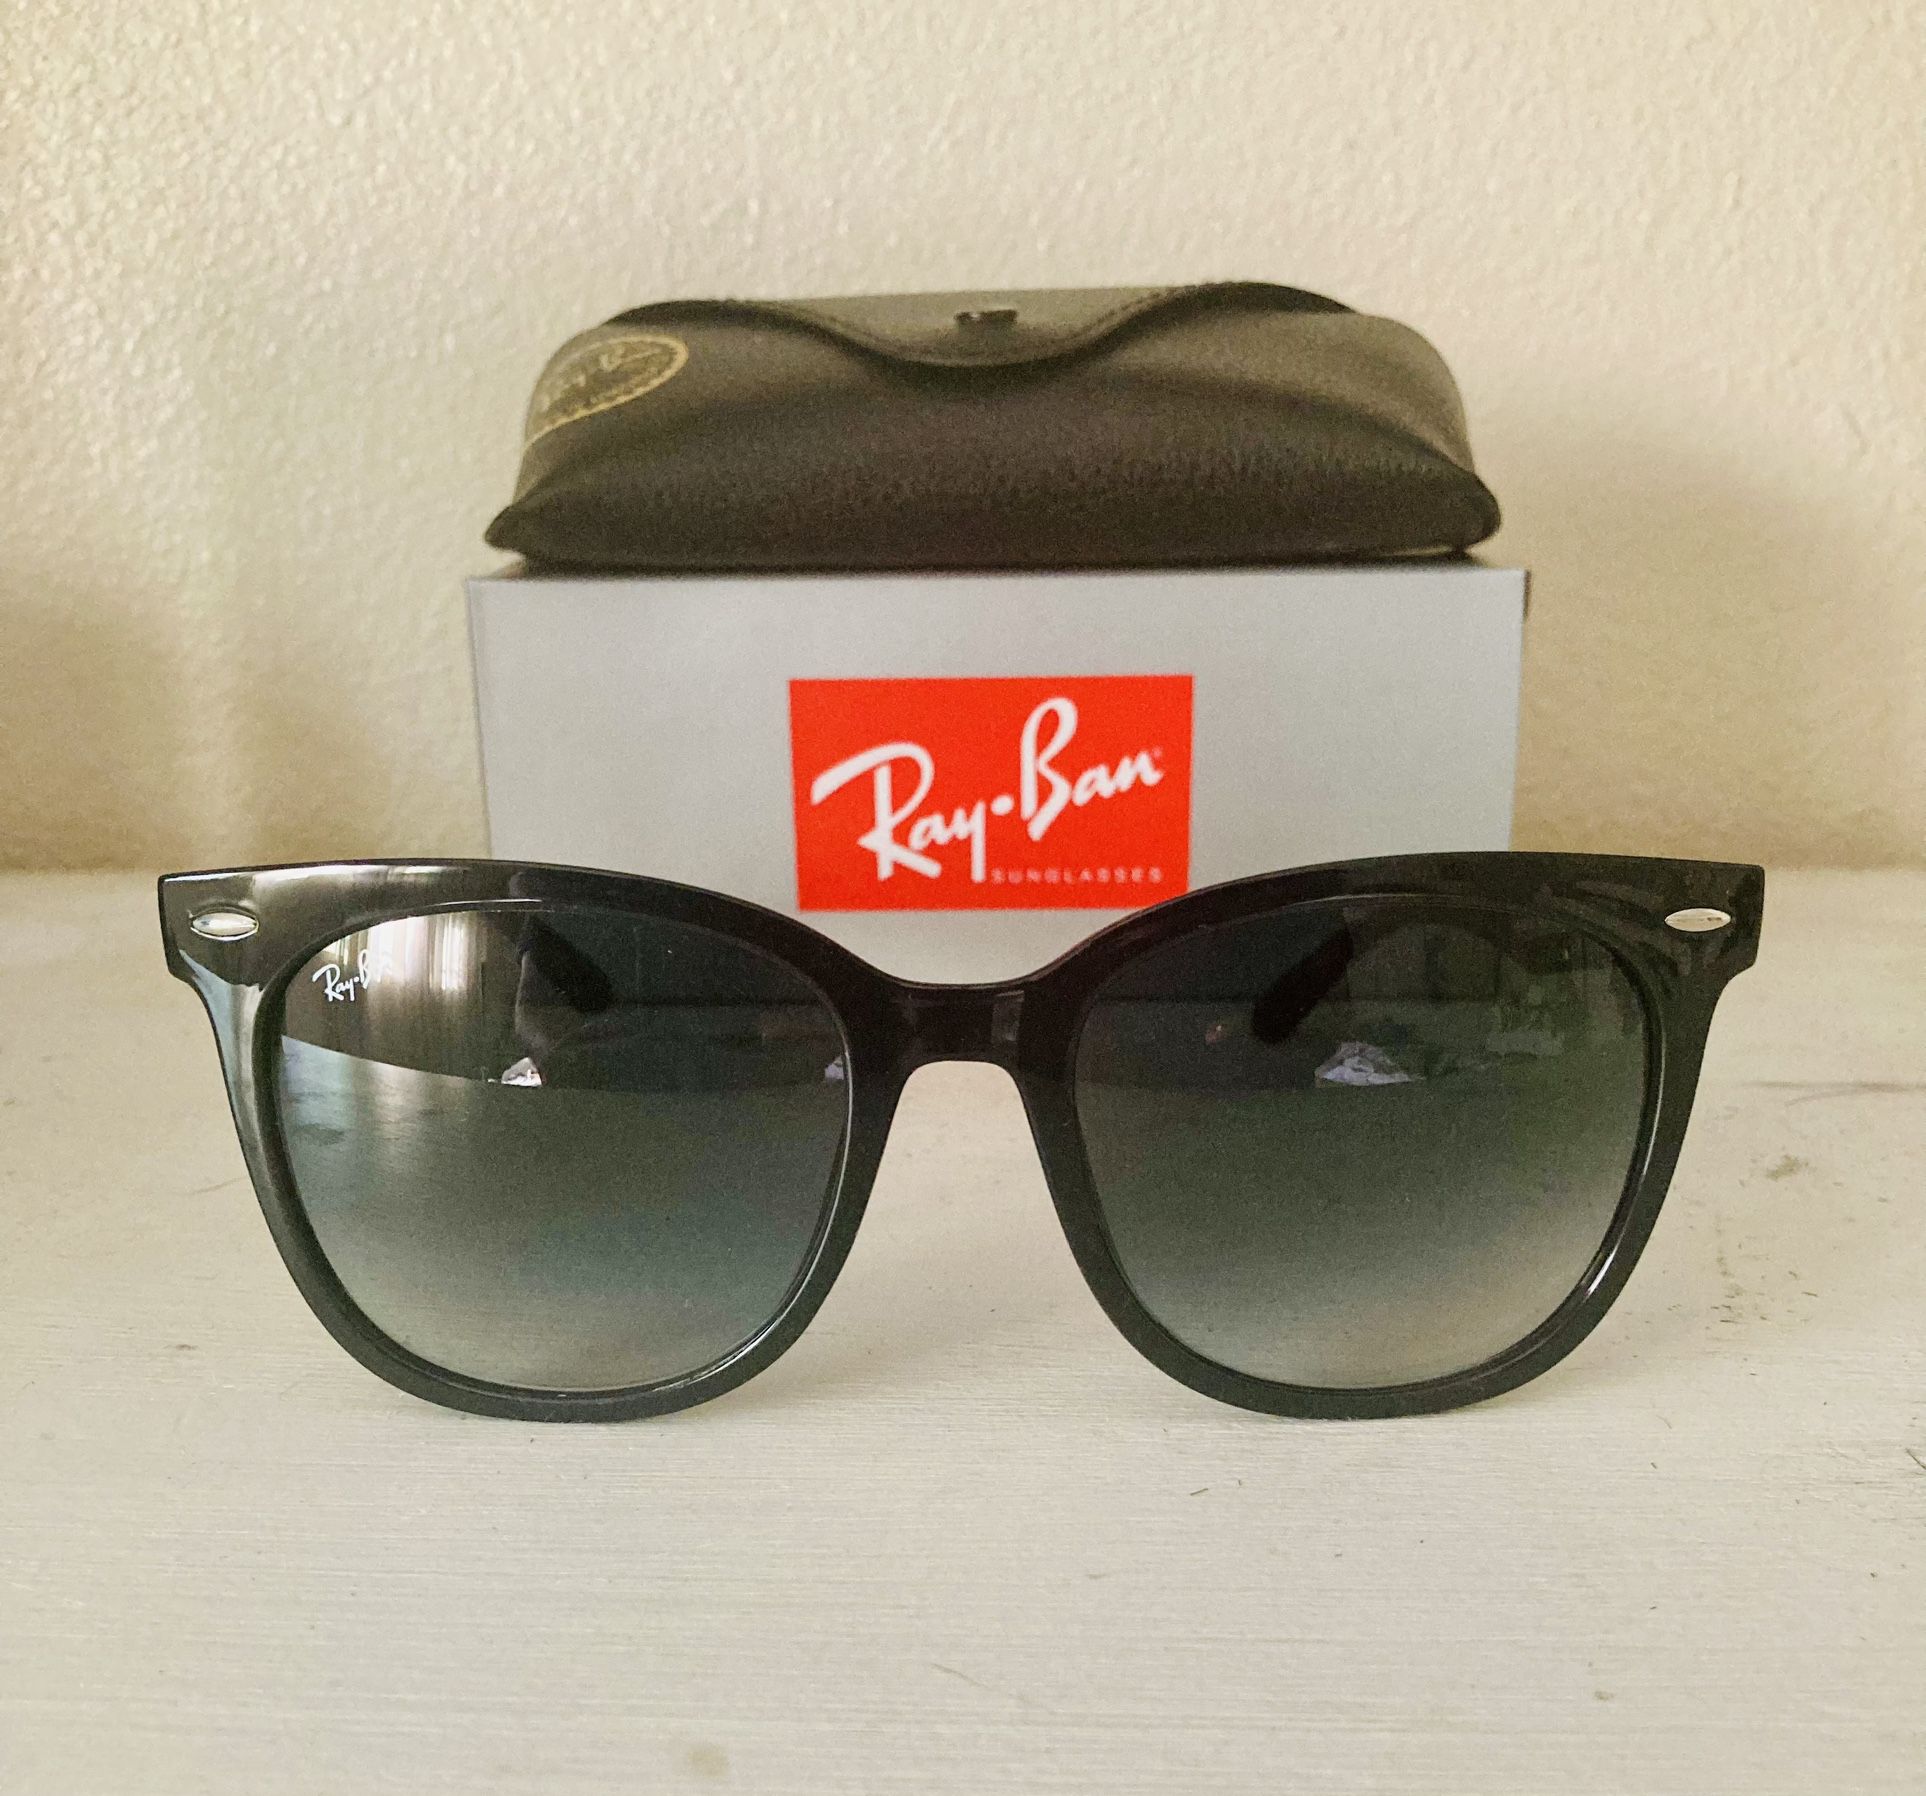 New RayBan Sunglasses 🕶️ (Mother’s Day Gift Idea)